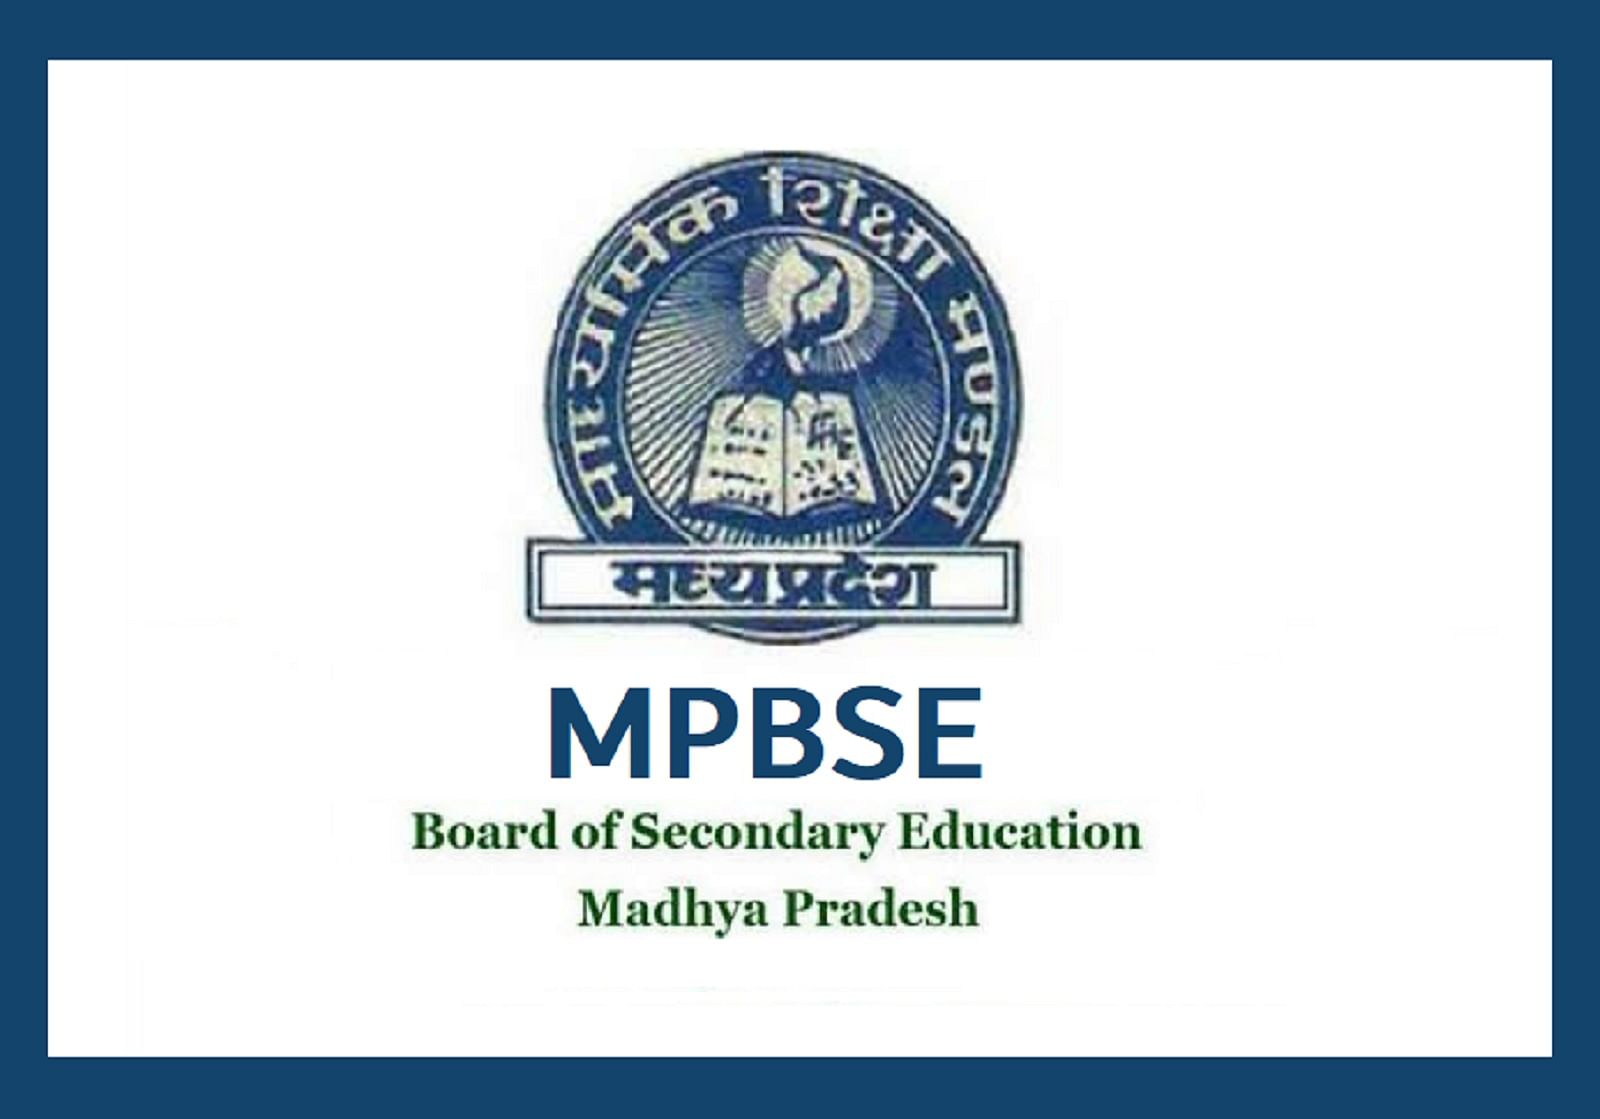 MP Board Result 2022 for Class 10 and 12 Expected By This Date, Know How to Check Here